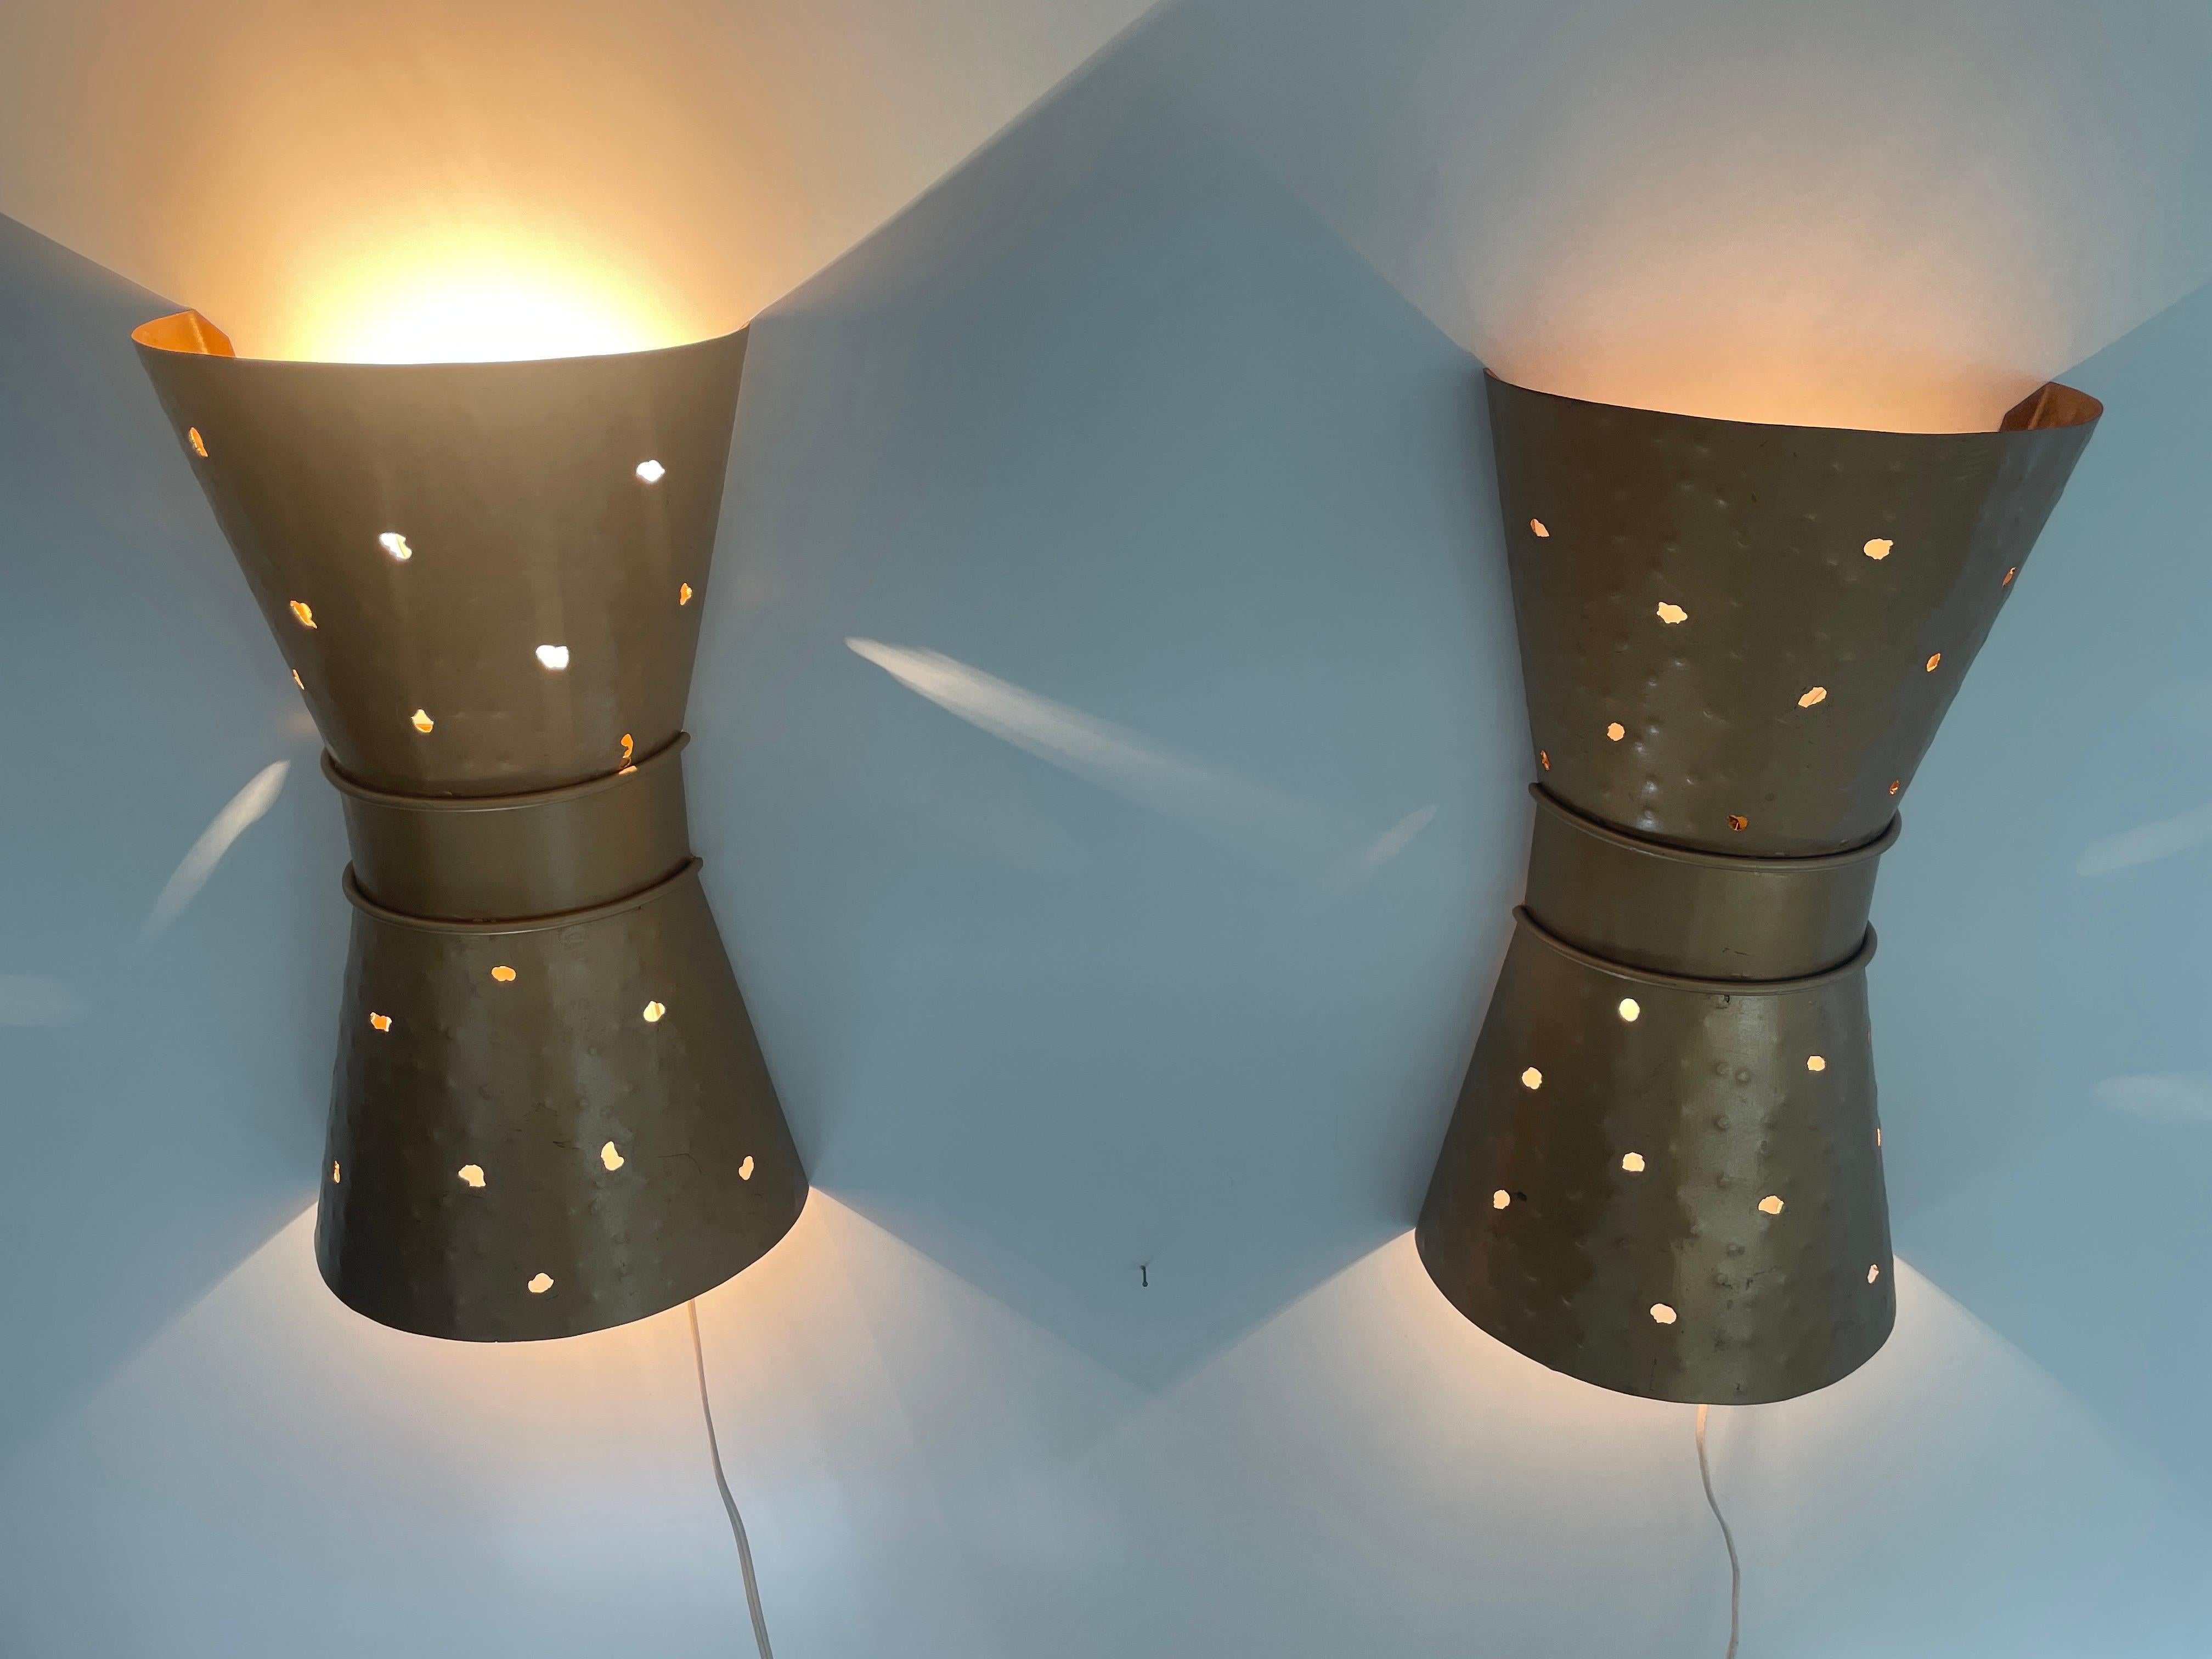 Diabolo Style Design Hand-crafted Pair of Sconces, 1970s, Germany For Sale 3